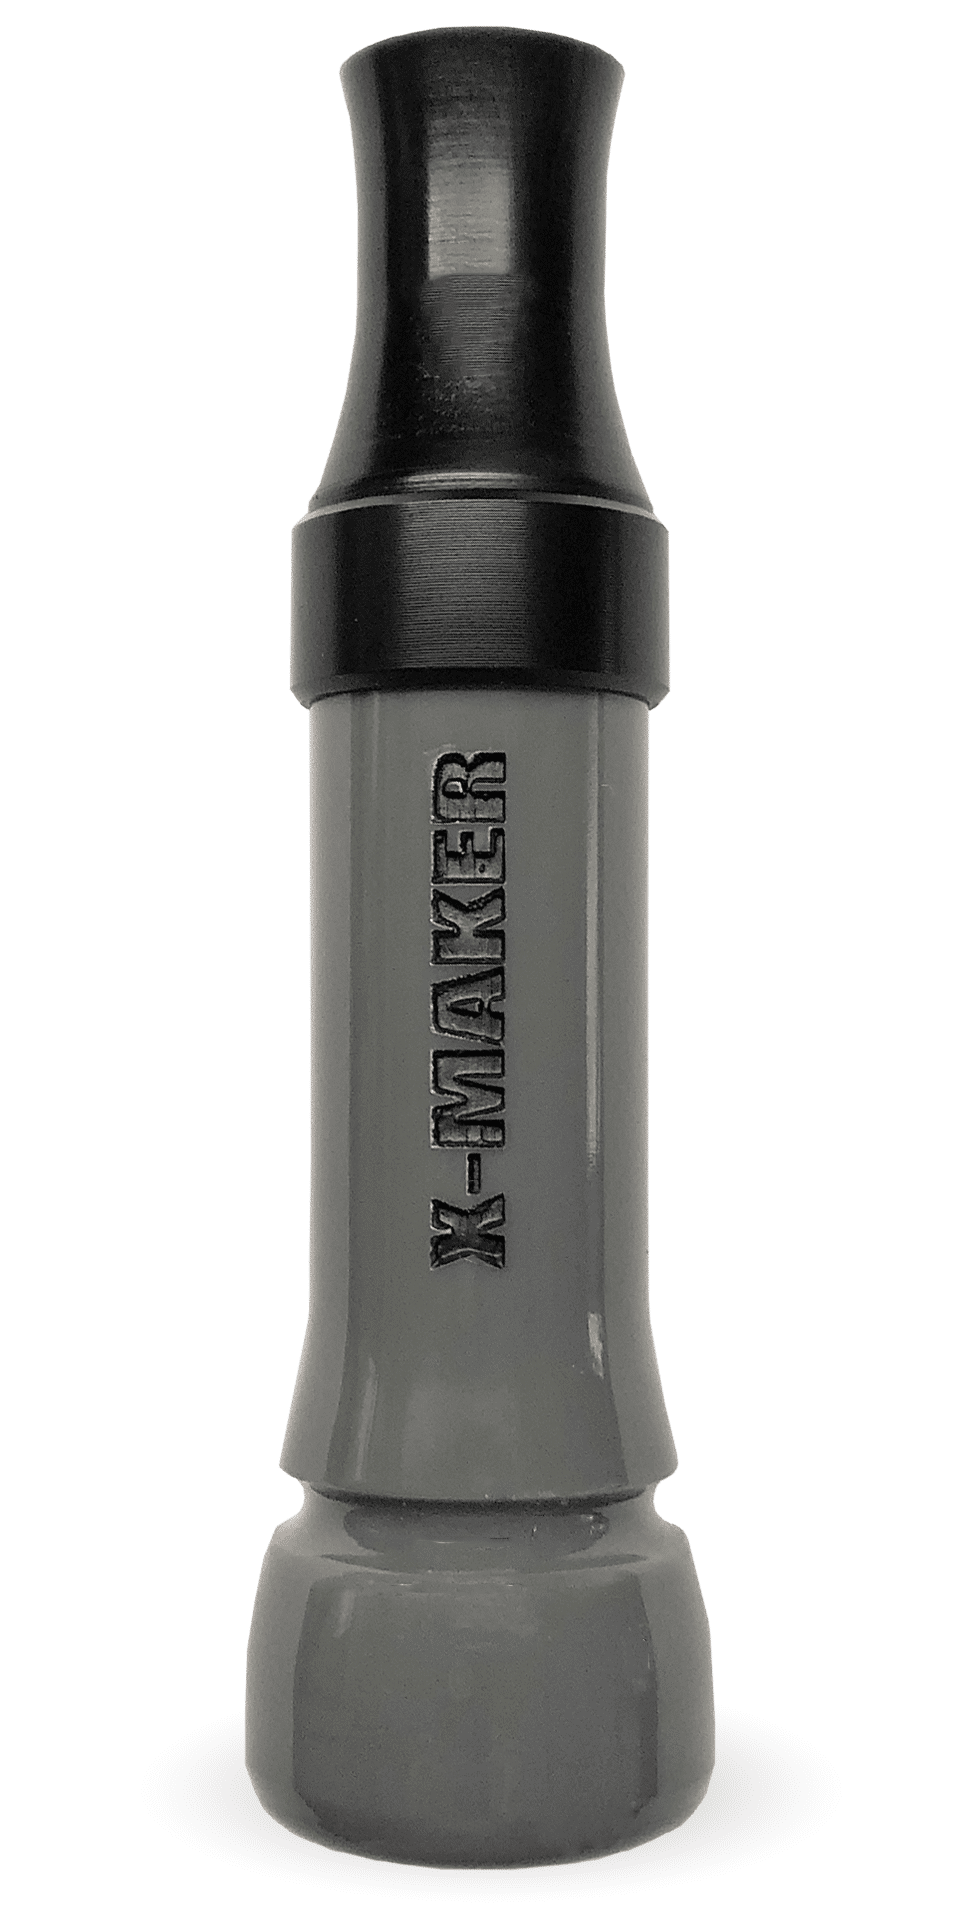 Introducing the X-MAKER Cut-Down Duck Call in Modern Grey, featuring a Black Anodized Band and Threaded Cast Acrylic Flared Keyhole Insert. This call is renowned for its responsiveness, delivering excellent high and low-end tones with impressive volume. It offers a loud, smooth, and user-friendly experience that sets it apart. Designed, cut, tuned, and sold by Kirk McCullough, these duck calls are celebrated as the pinnacle of ease and quality. Proudly made on the great Mississippi flyway in Arkansas.